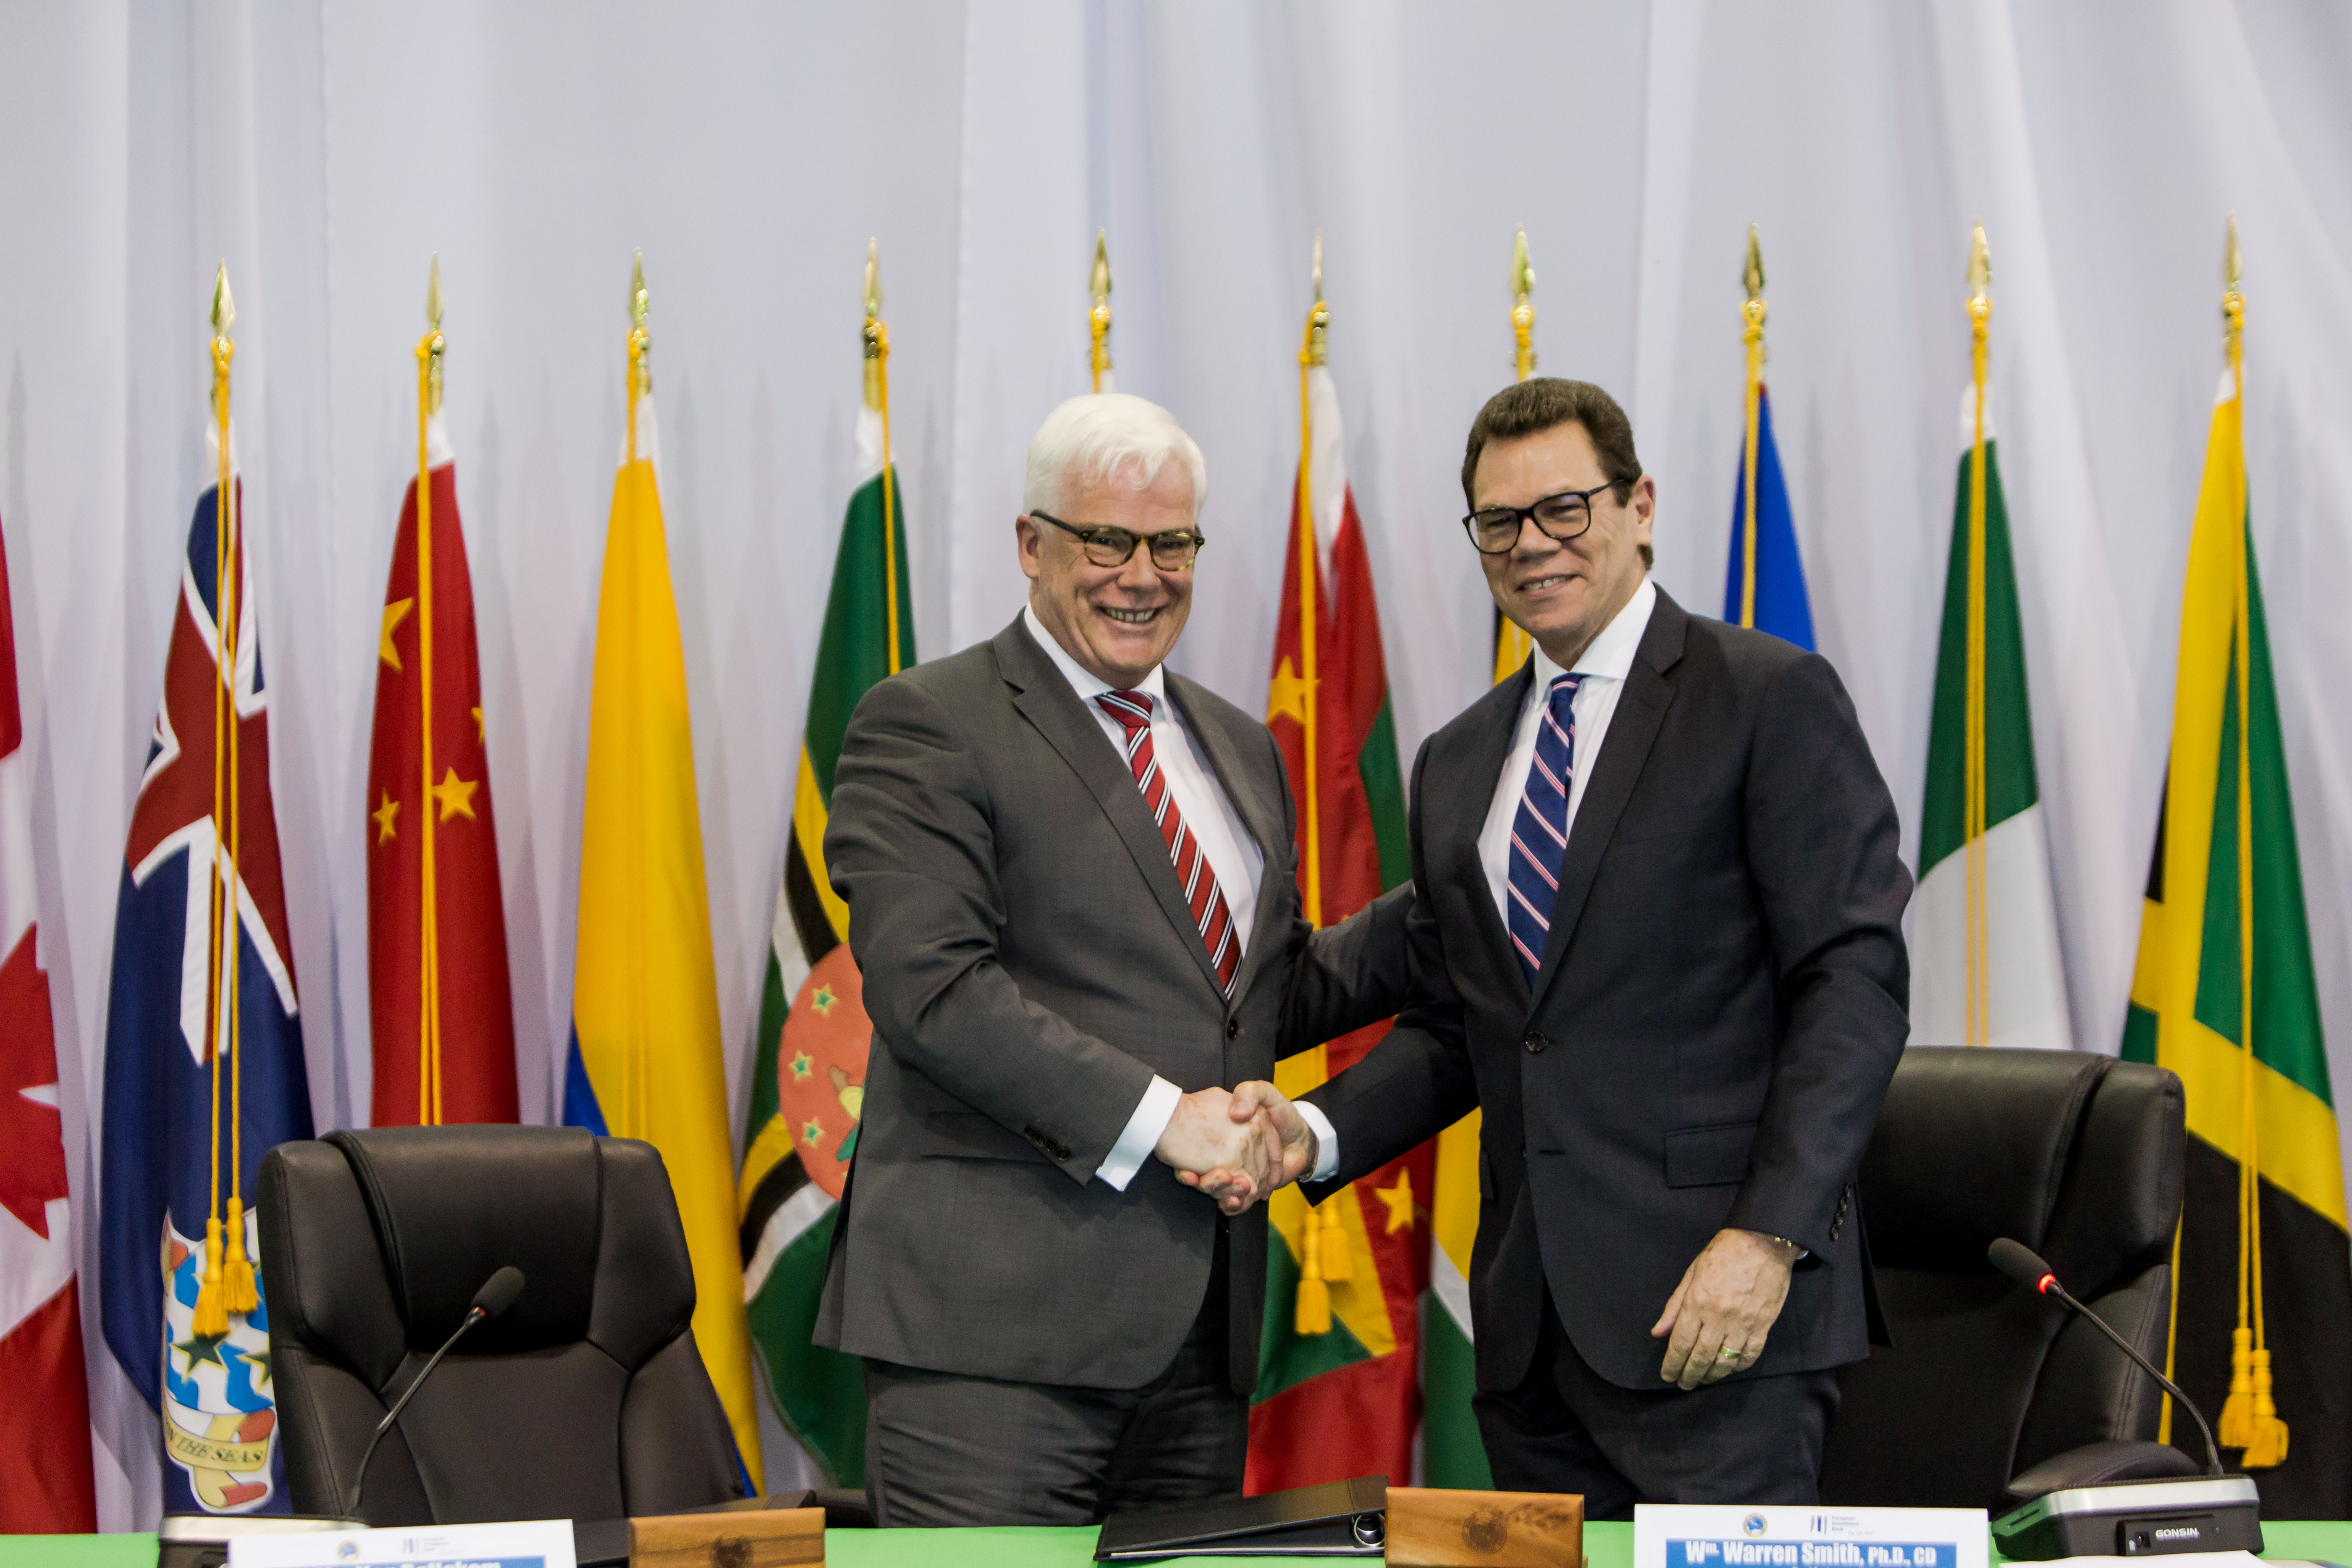 EIB Vice President, Pim Van Ballekom (left) and CDB President, Dr. Wm. Warren Smith (right) shake hands after signing the agreement for the Climate Action Framework Loan II on May 24, 2017 in Providenciales, Turks and Caicos Islands.